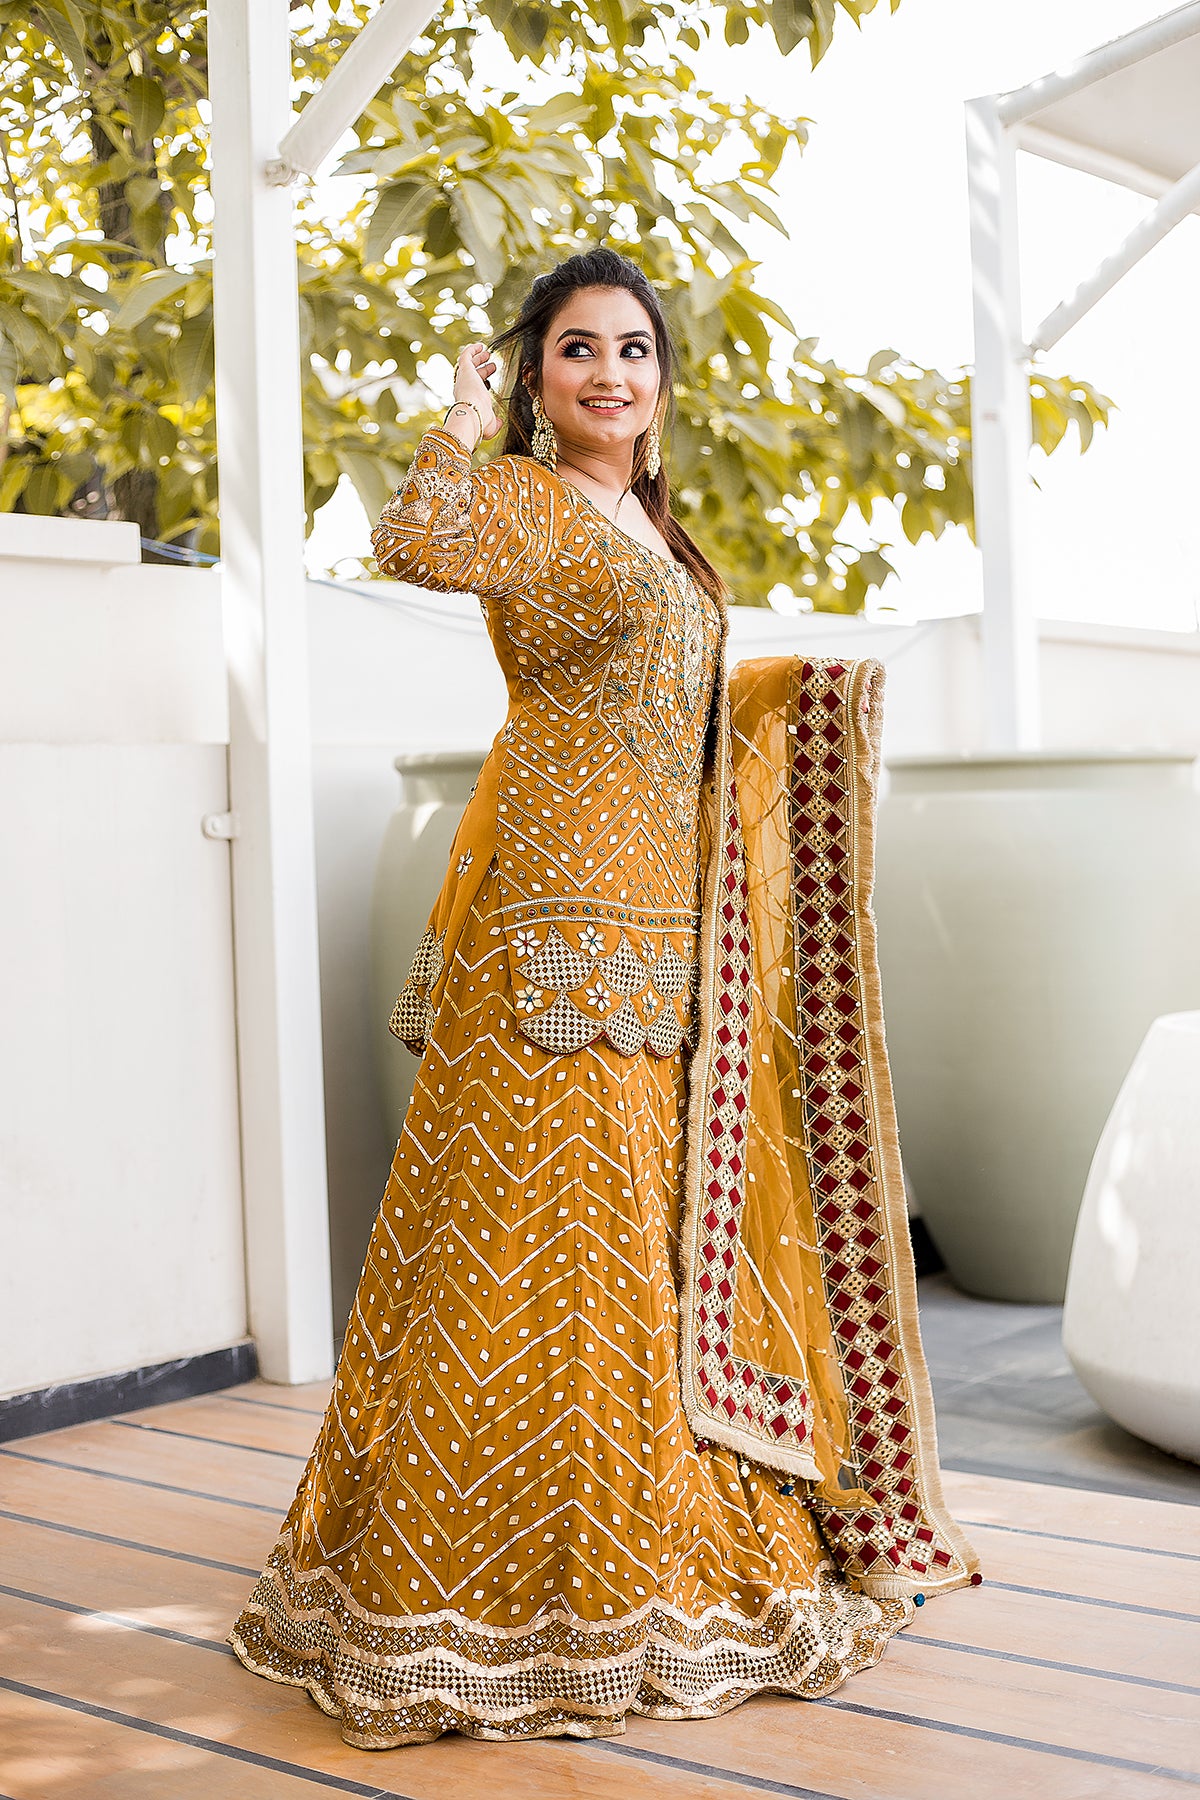 Mustard Yellow Ethnic Jeweled Skirt Set Indian Clothing in Denver, CO, Aurora, CO, Boulder, CO, Fort Collins, CO, Colorado Springs, CO, Parker, CO, Highlands Ranch, CO, Cherry Creek, CO, Centennial, CO, and Longmont, CO. NATIONWIDE SHIPPING USA- India Fashion X